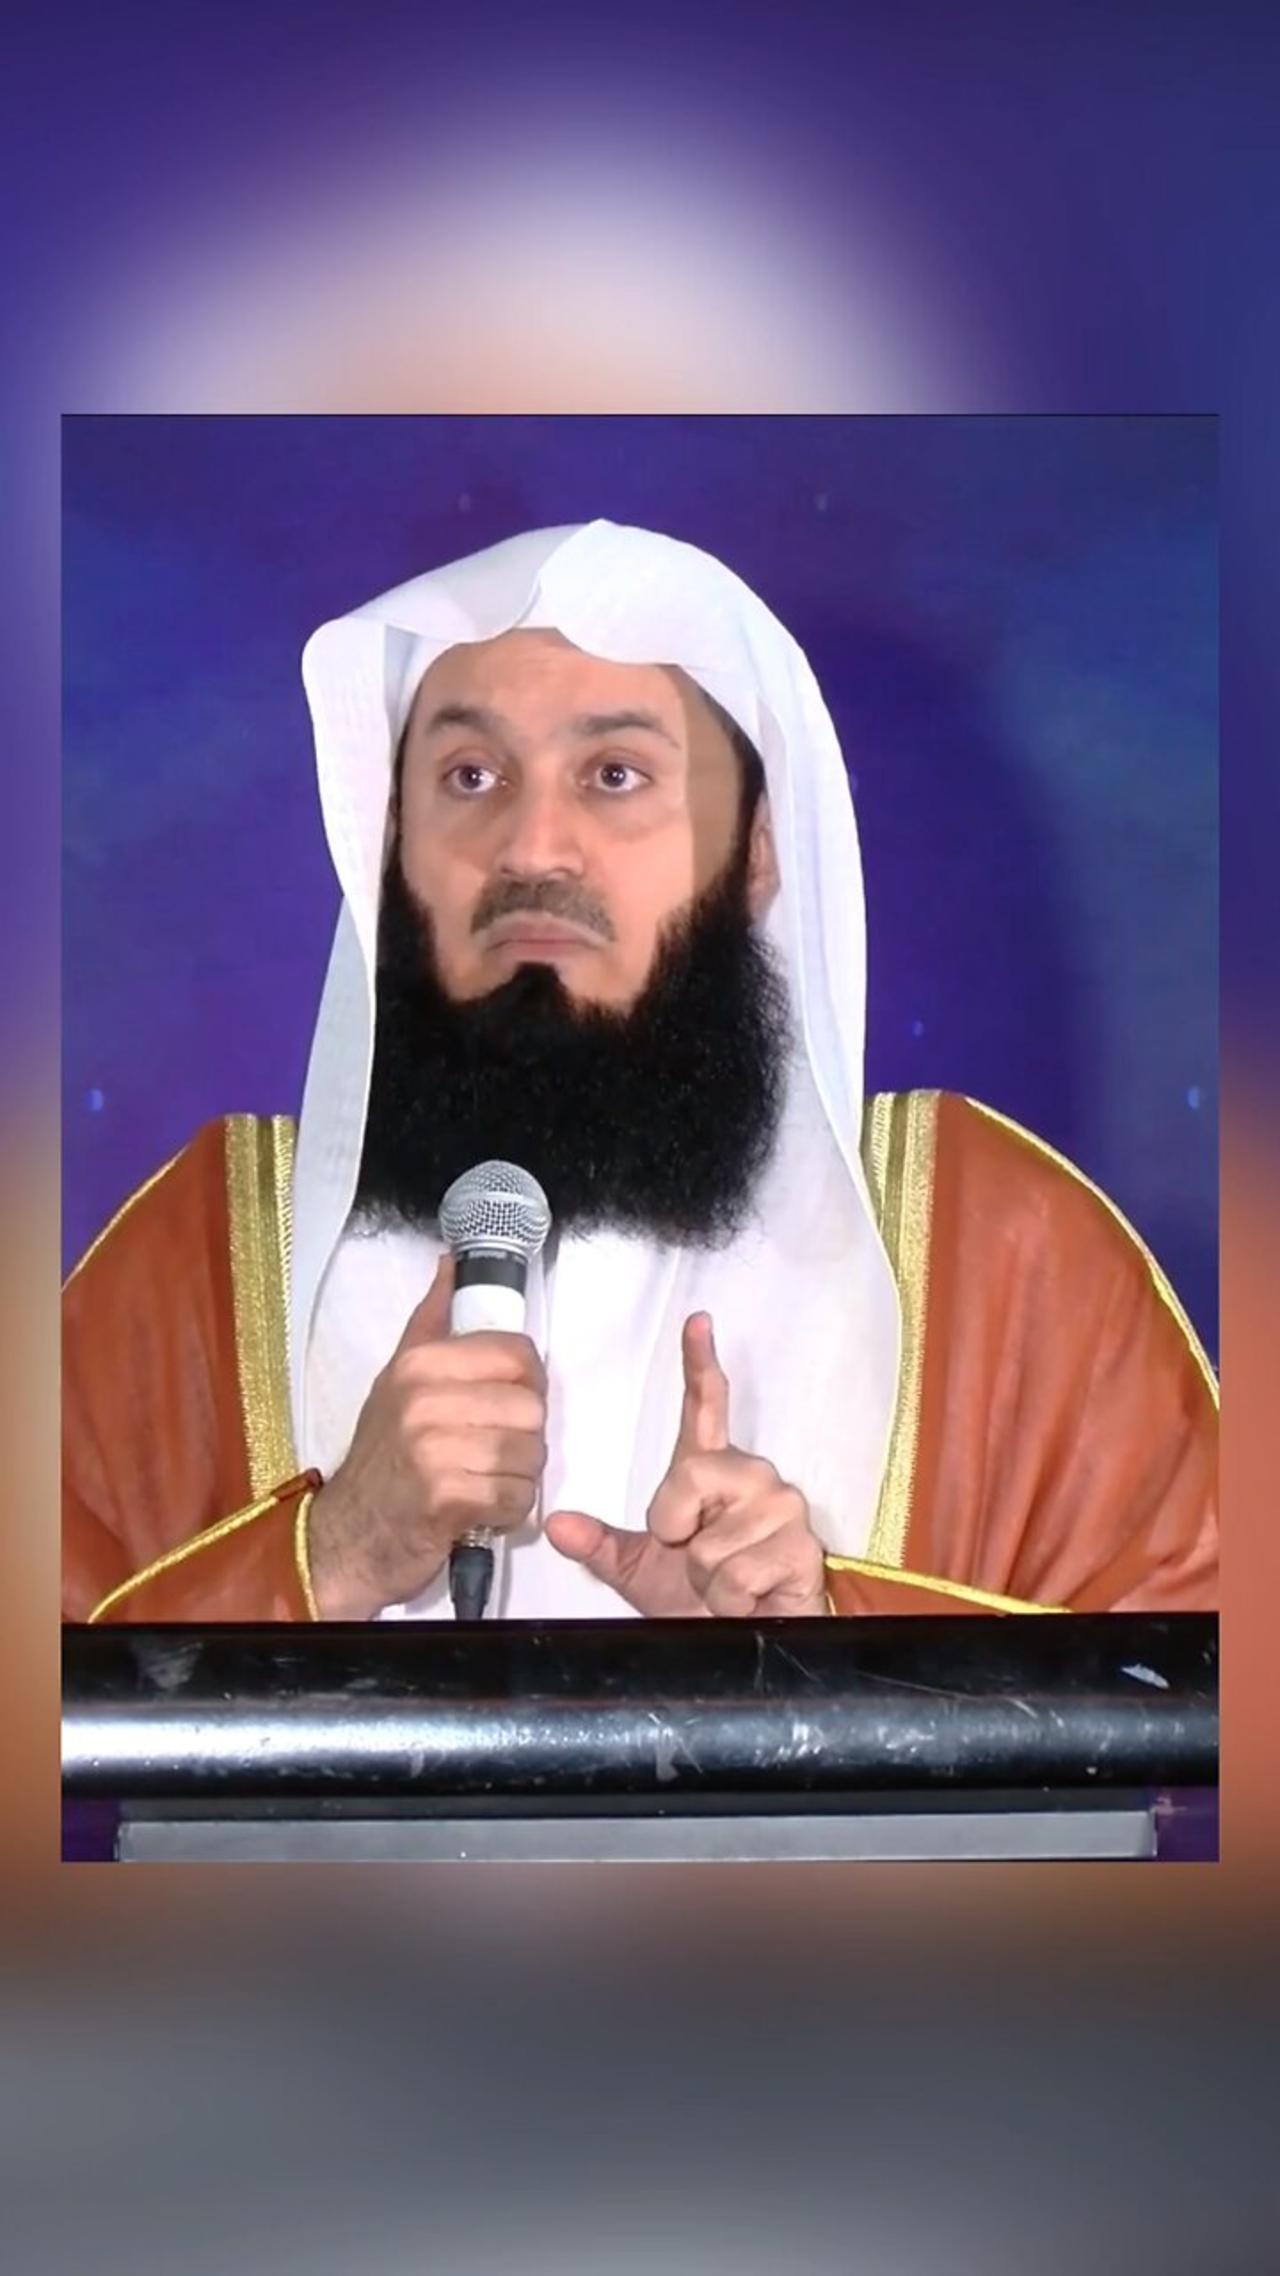 Do You Know Why We Are In Pain - Mufti Menk #mufti #muftimenk